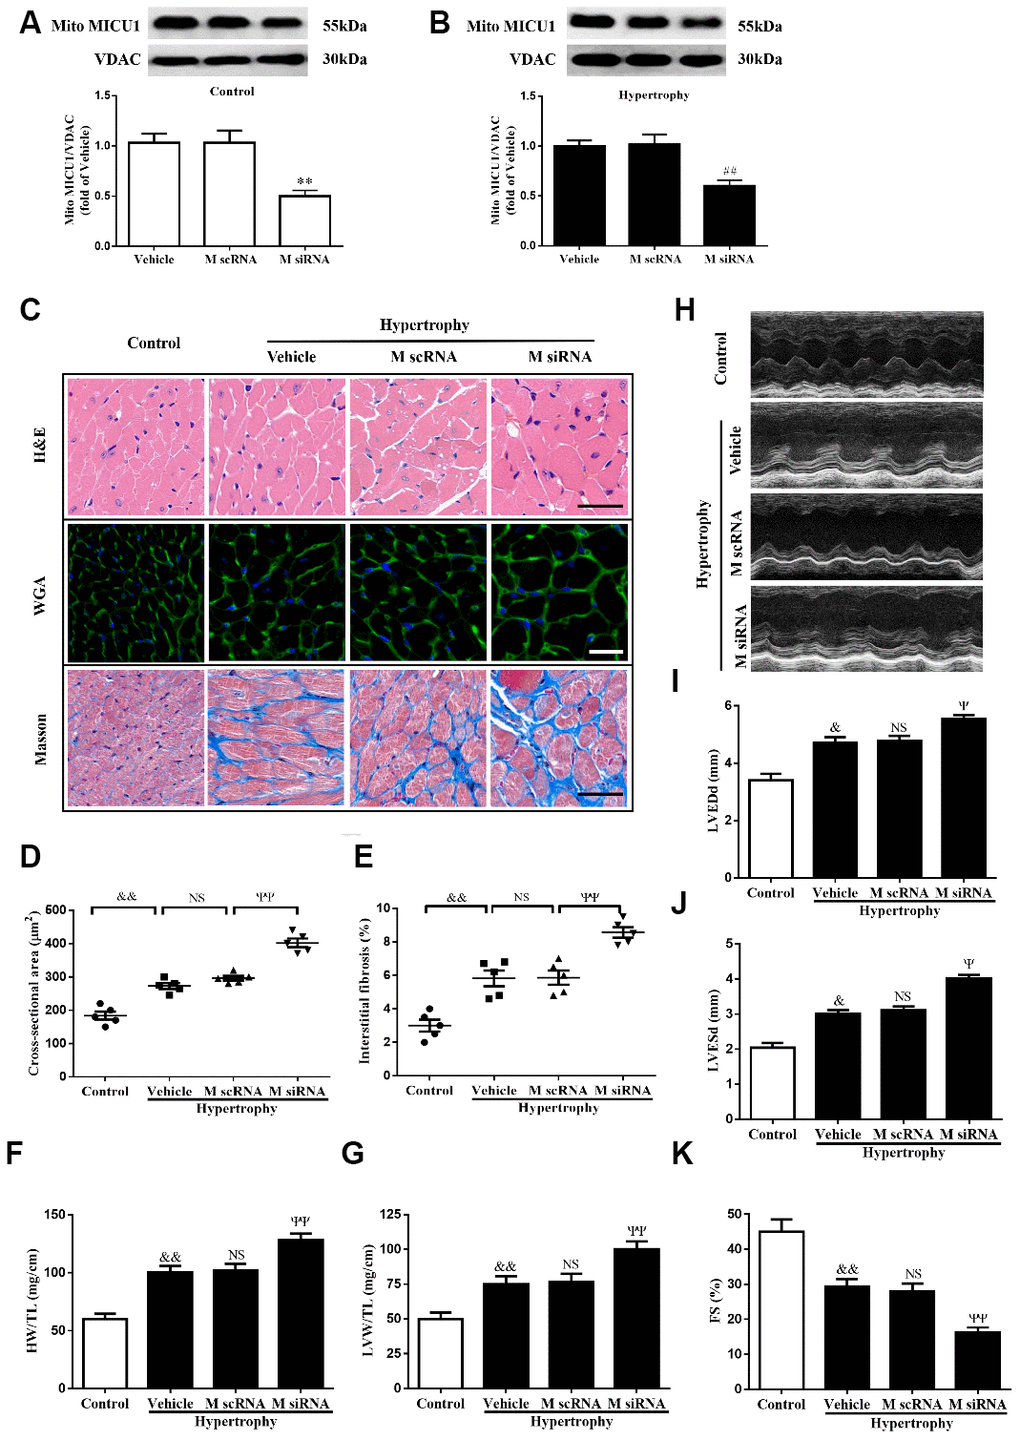 MICU1 downregulation in the heart aggravated Ang-II-induced cardiac hypertrophy. (A) Western blotting was used to measure the transfection efficiency of MICU1 siRNA in control mice. (B) Transfection efficiency of MICU1 siRNA in mice subjected to Ang-II was determined by Western blotting. (C) The heart sections stained with hematoxylin-eosin (H&E, the first row; Scale bars=50 μm), wheat germ agglutinin (WGA, the second row; Scale bars=20 μm) and Masson (the third row; Scale bars=50 μm) from the indicated groups were measured. (D) Cross-sectional cardiomyocyte areas were summarized. (E) The interstitial fibrosis was quantified. (F, G) The ratio of heart weight to tibia length (HW/TL) (F) and left ventricular weight to tibia length (LVW/TL) (G) were determined in different mice. (H) Representative echocardiographic image of the left ventricle in different mice was represented. (I–K) Echocardiographic assessment of left ventricular end-diastolic dimension (LVEDd) (I), left ventricular end-systolic dimension (LVESd) (J) and fractional shortening (FS) (K) was used to reflect cardiac function. M scRNA, scrambled siRNA; M siRNA, MICU1-specific siRNA. All the data represent the means ± SEM. N=6-8/group. **P##P&P&&PΨPΨΨP